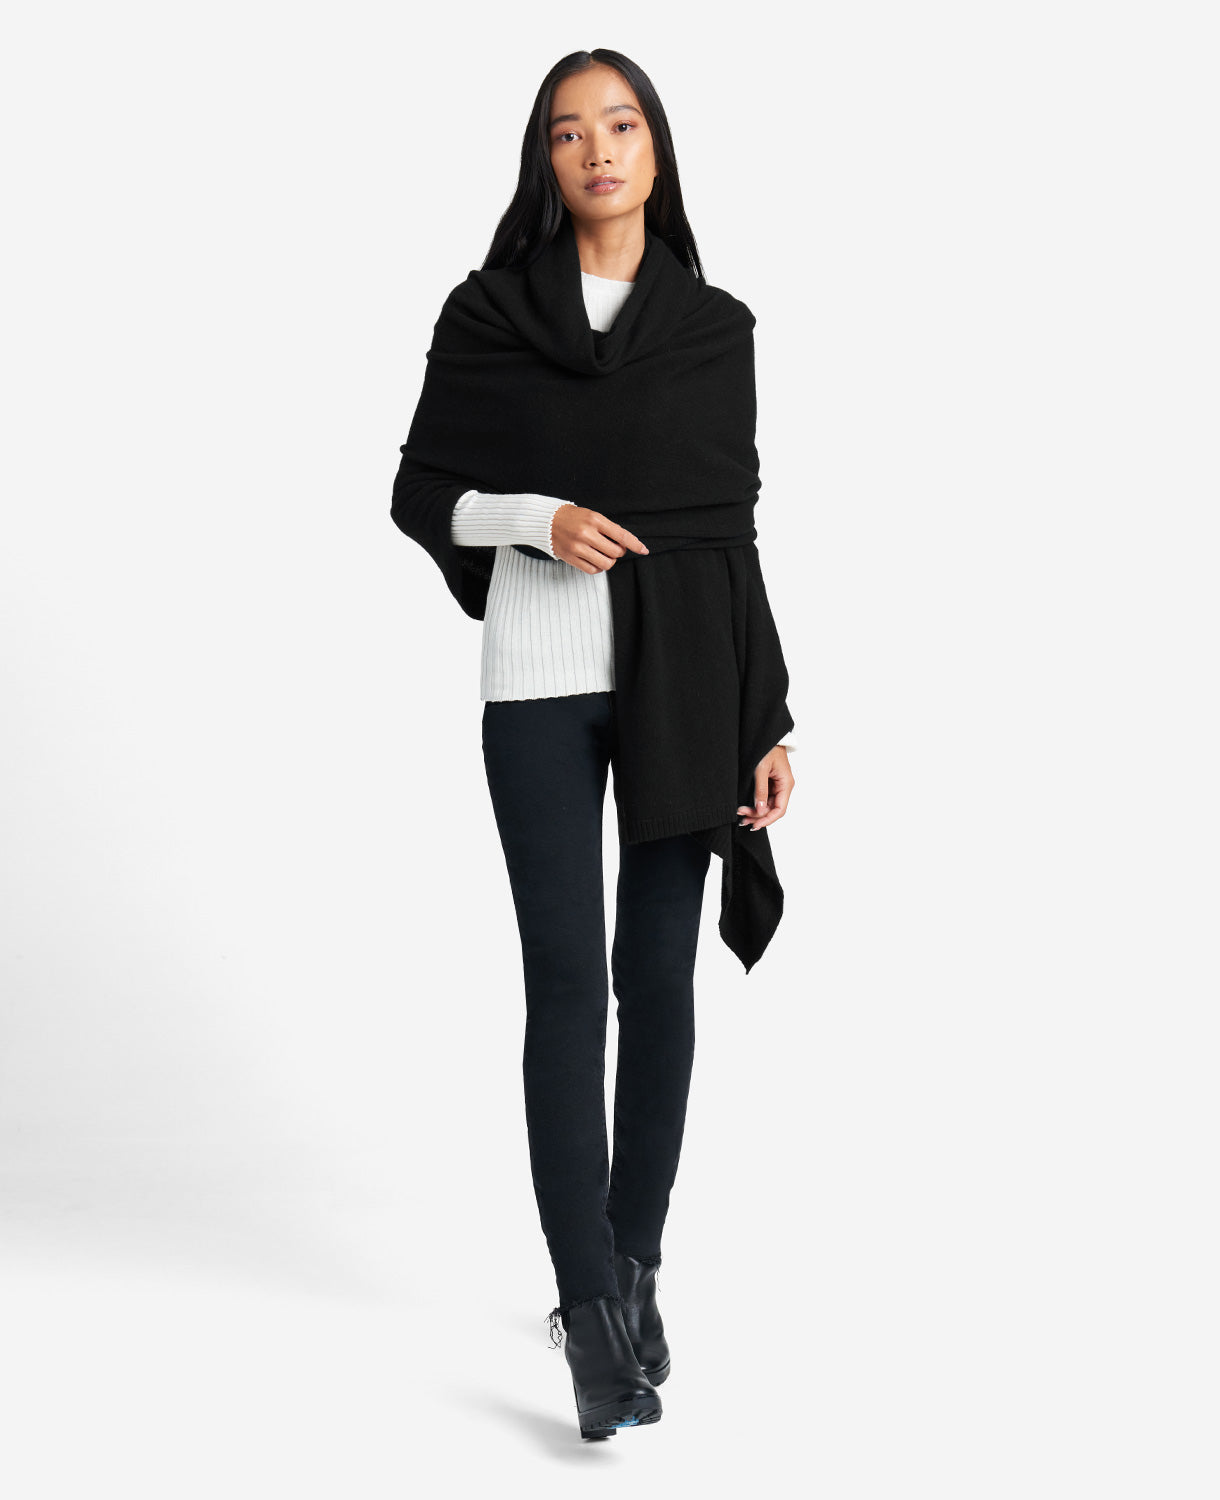 Kenneth Cole Site Exclusive! Pure Cashmere Multi-wear Wrap In Black